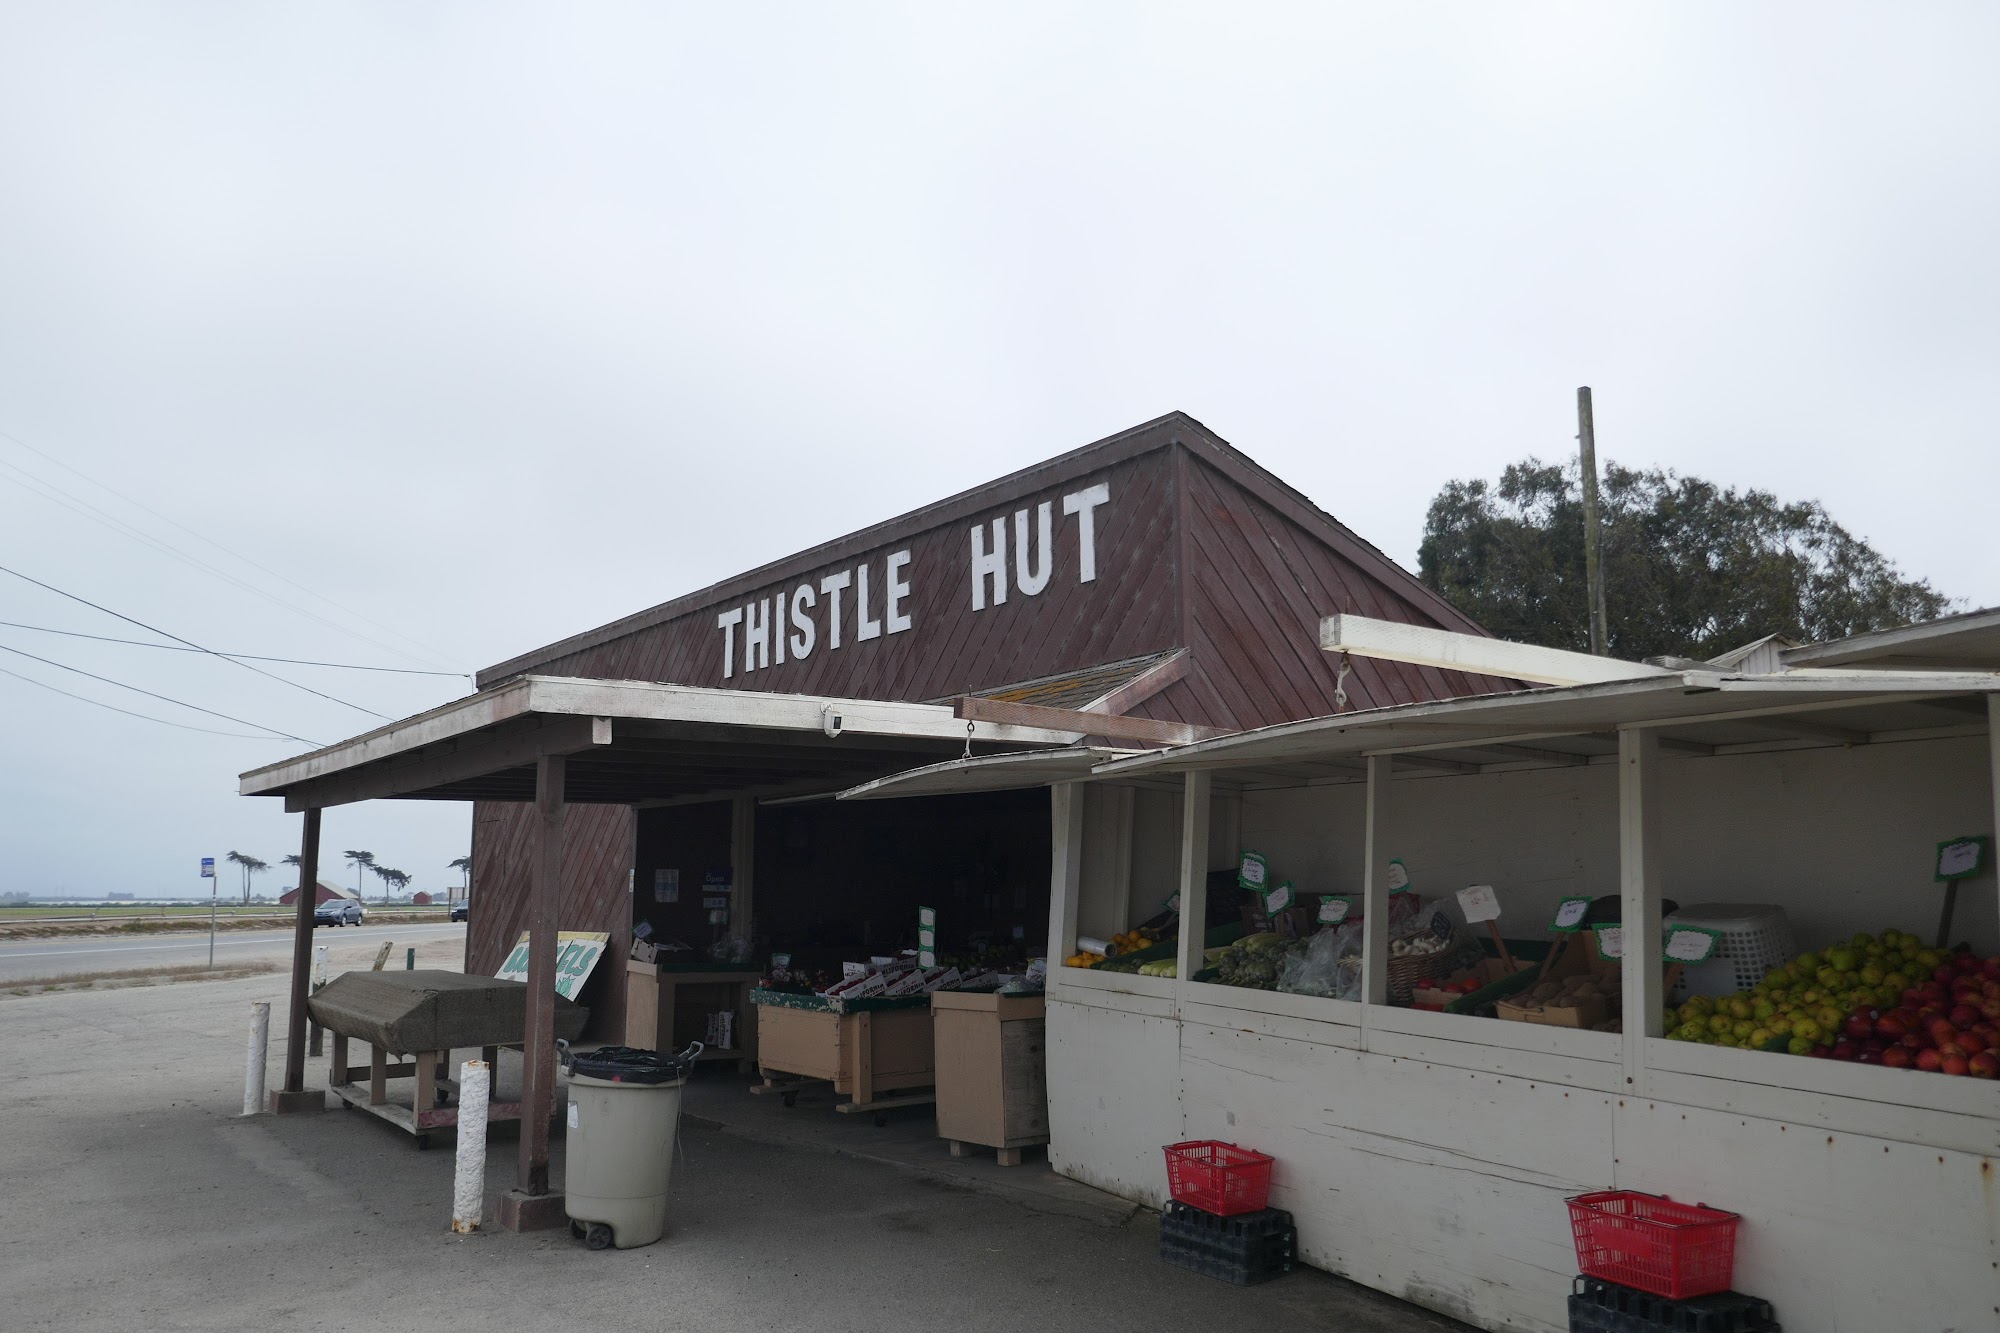 Thistle Hut Grocery